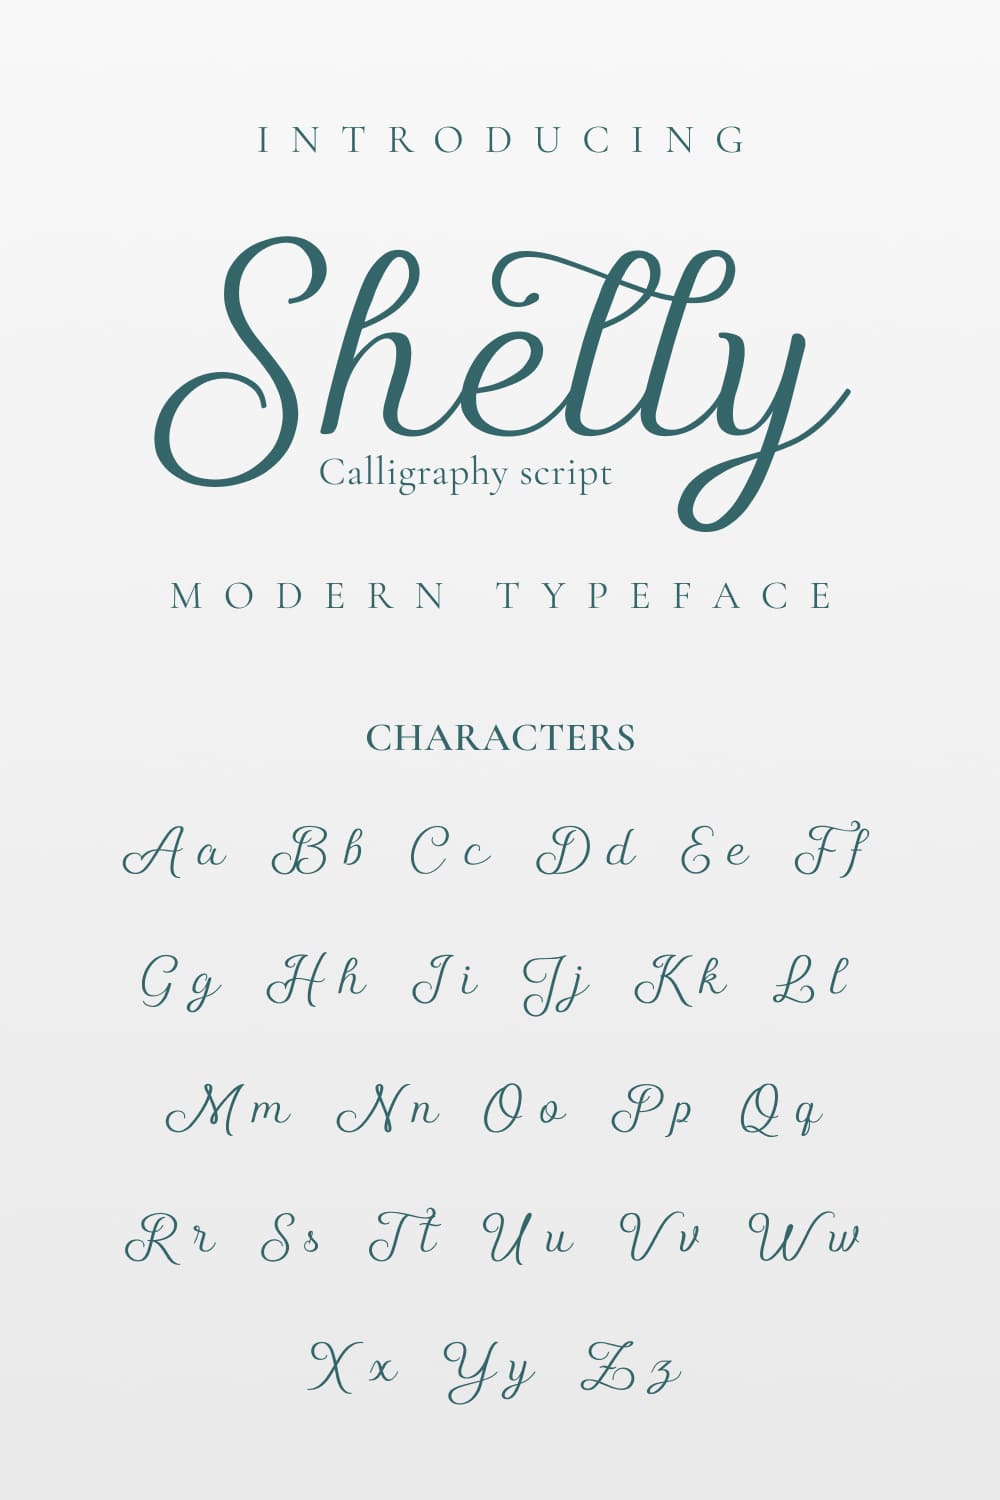 MasterBundles Shelly free script font Pinterest Collage Image with Characters.